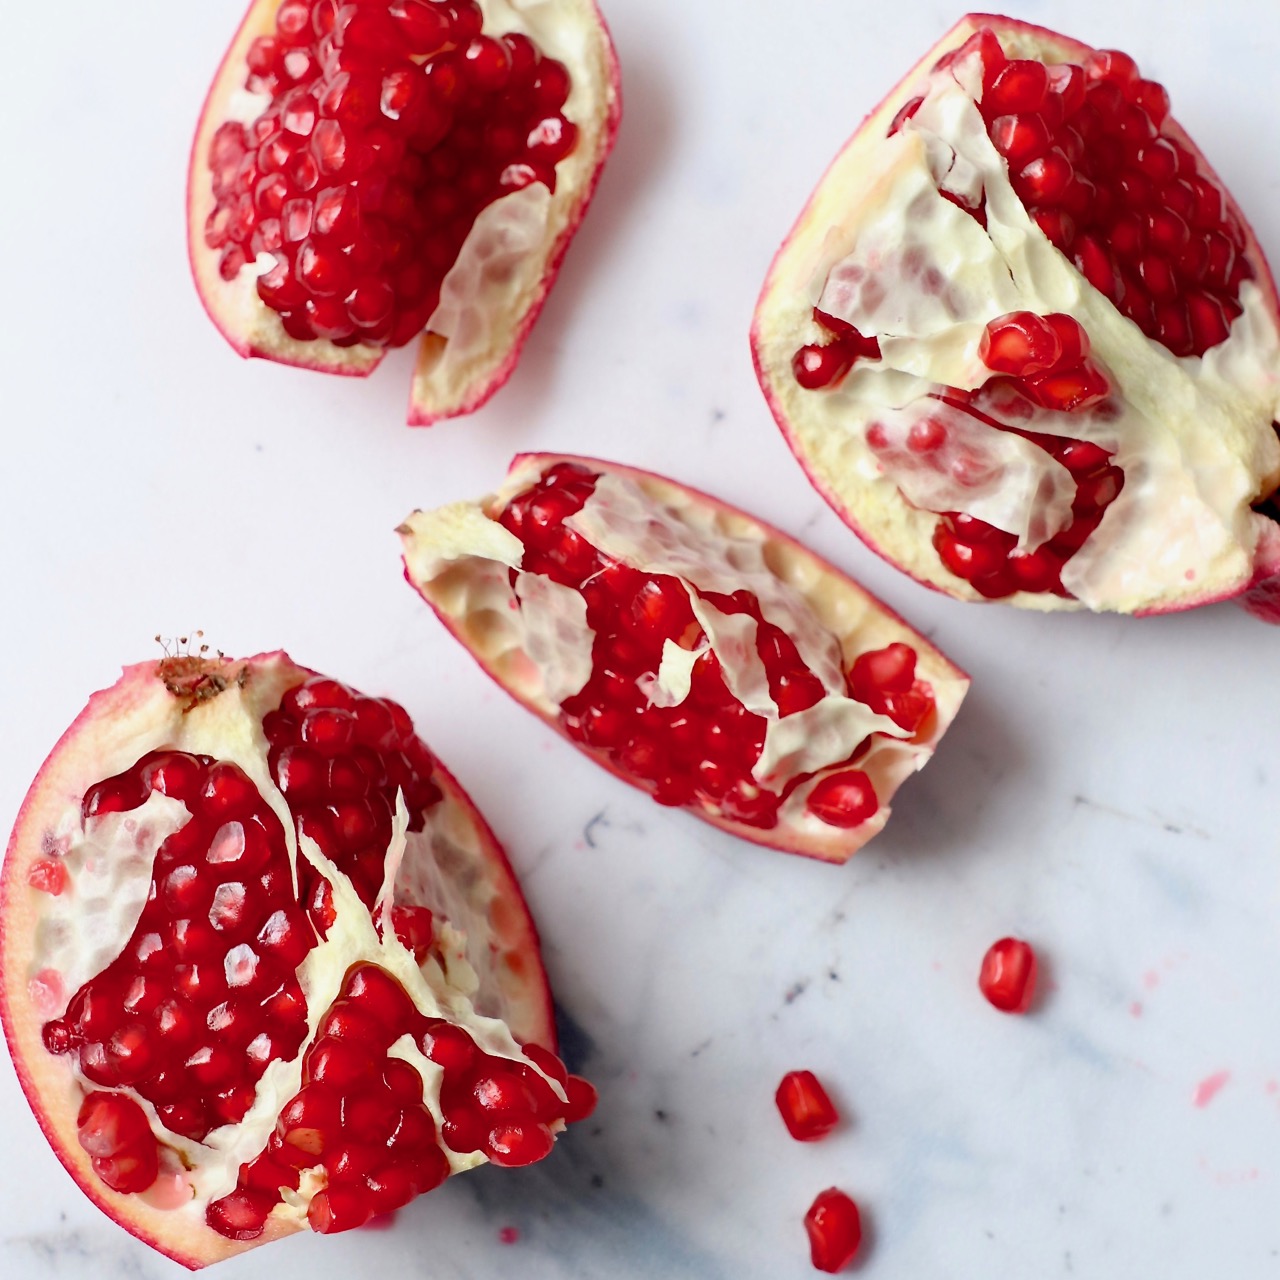 how-to-cut-a-pomegranate-whitneybond